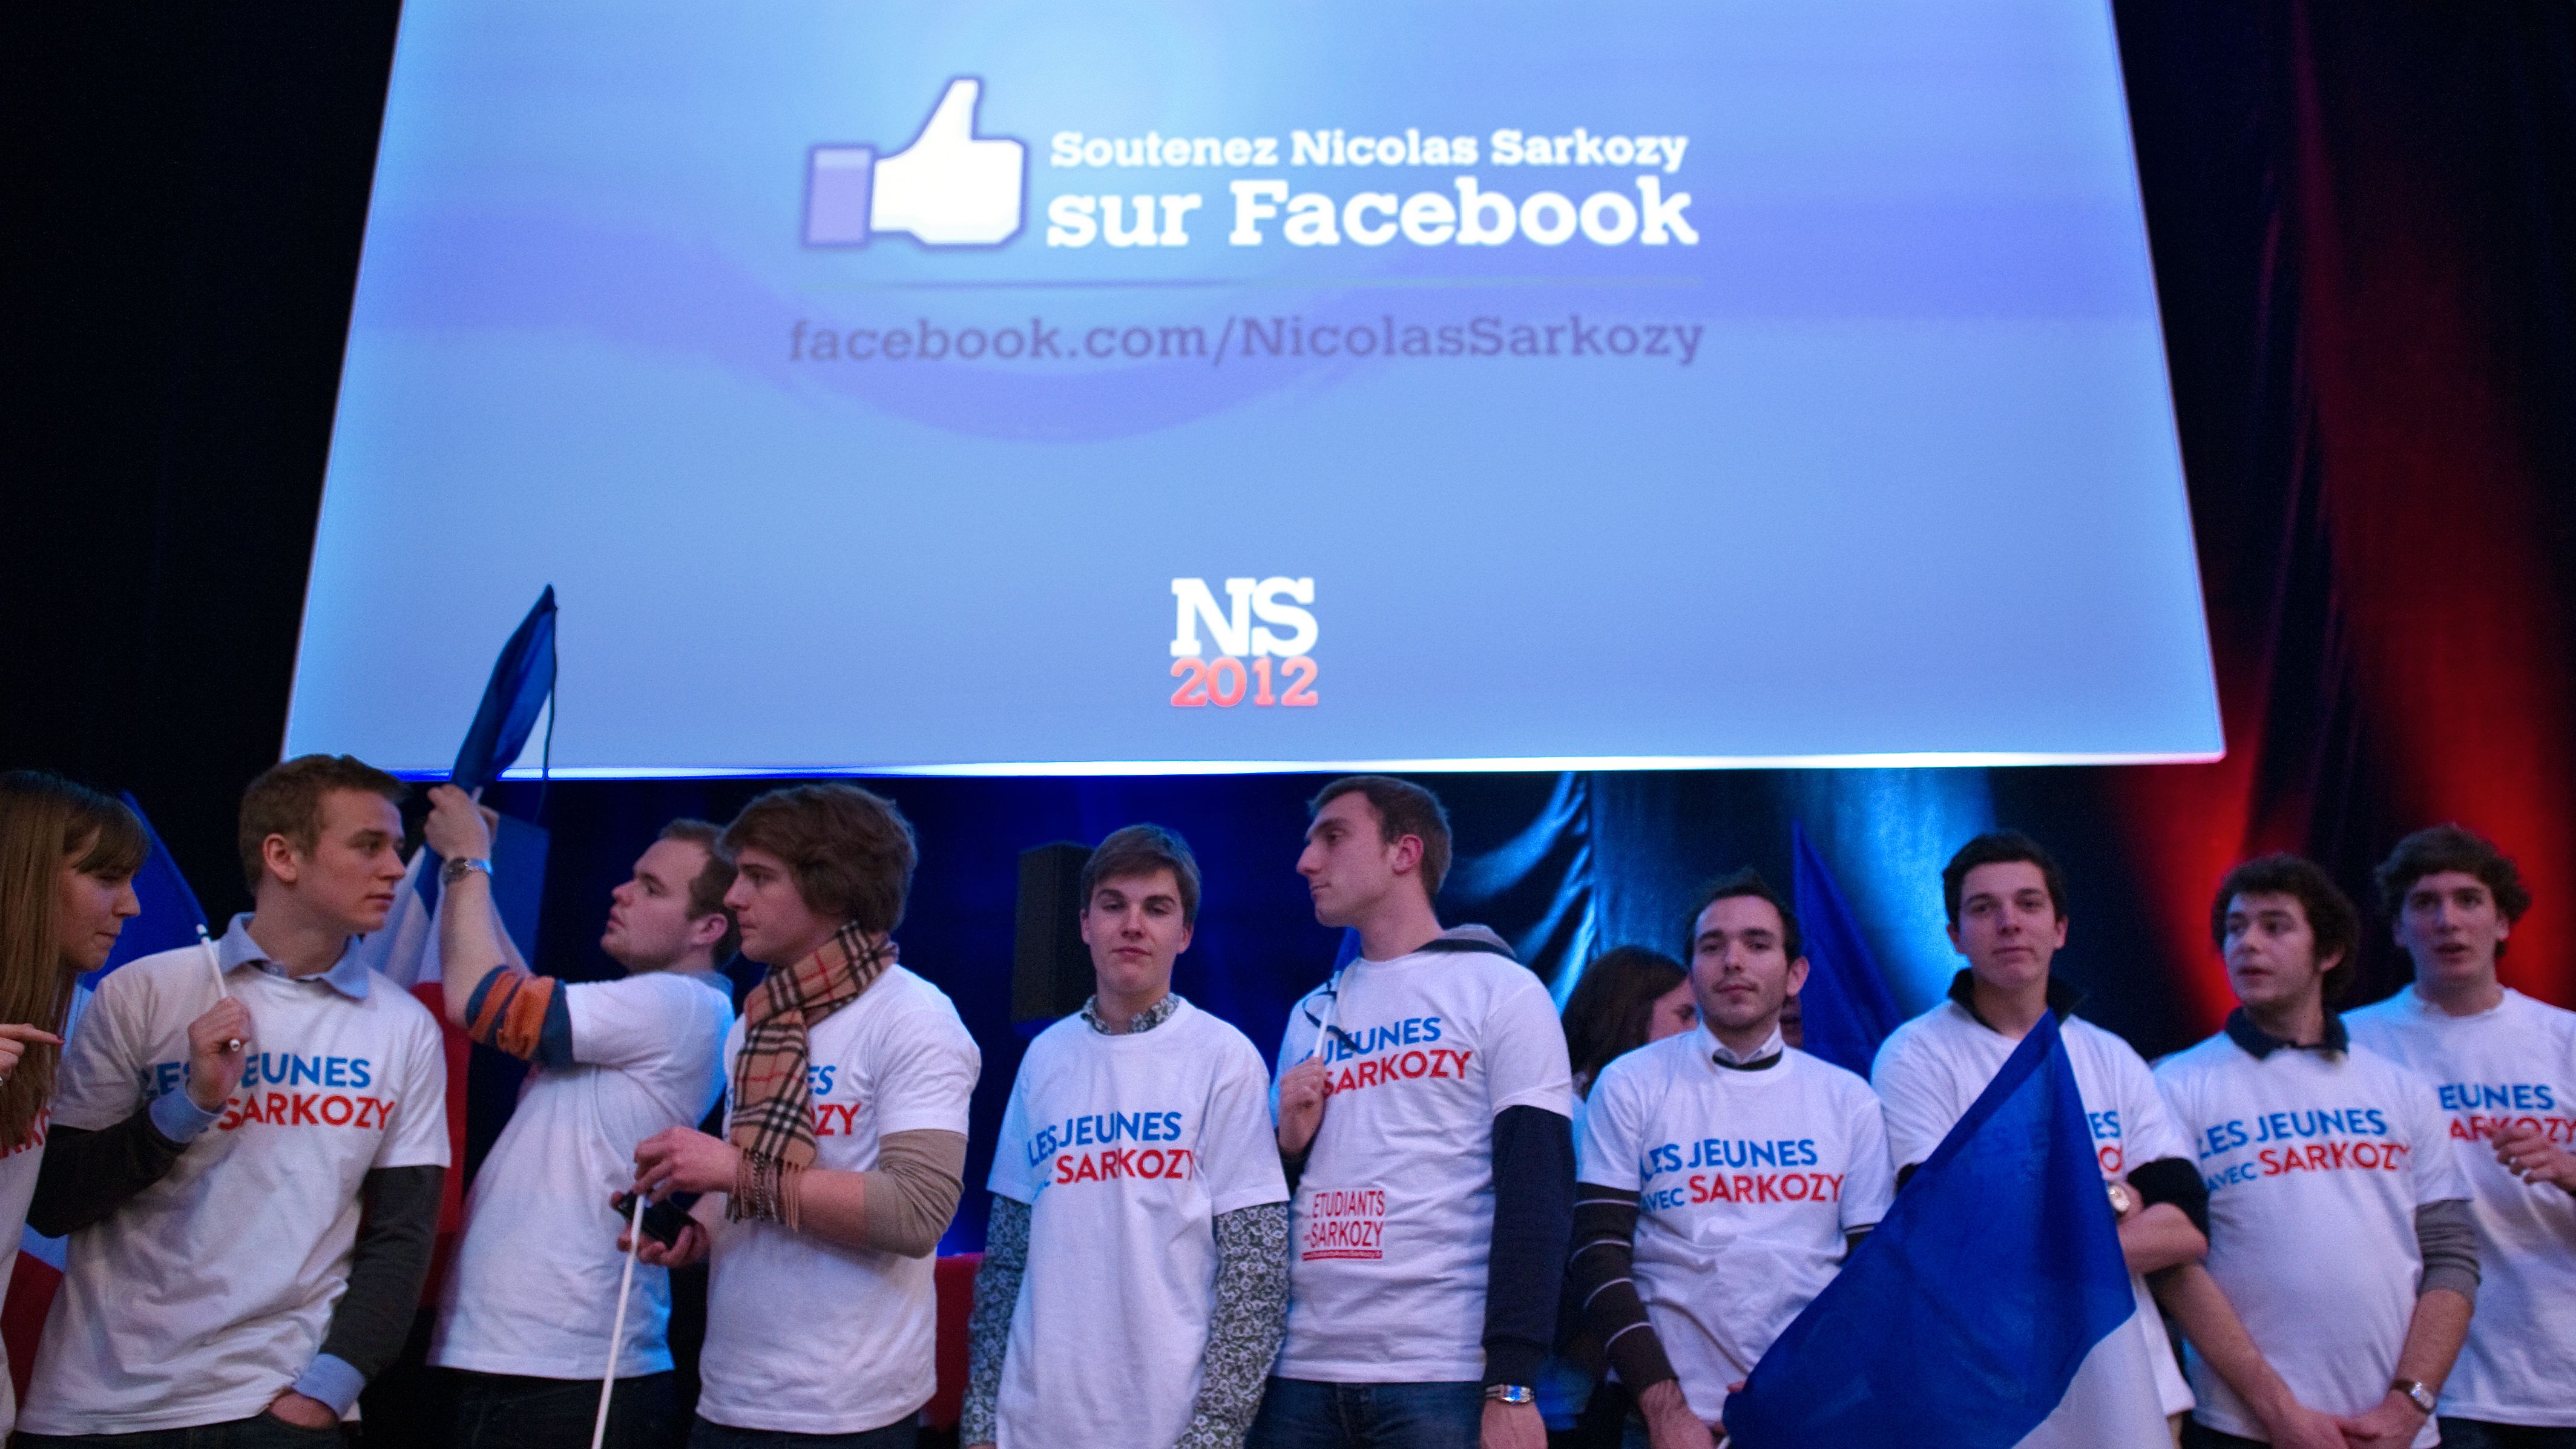 Young supporters wait for Nicolas Sarkozy, as a giant screen provides his Facebook adress during a campaign meeting in Lille.